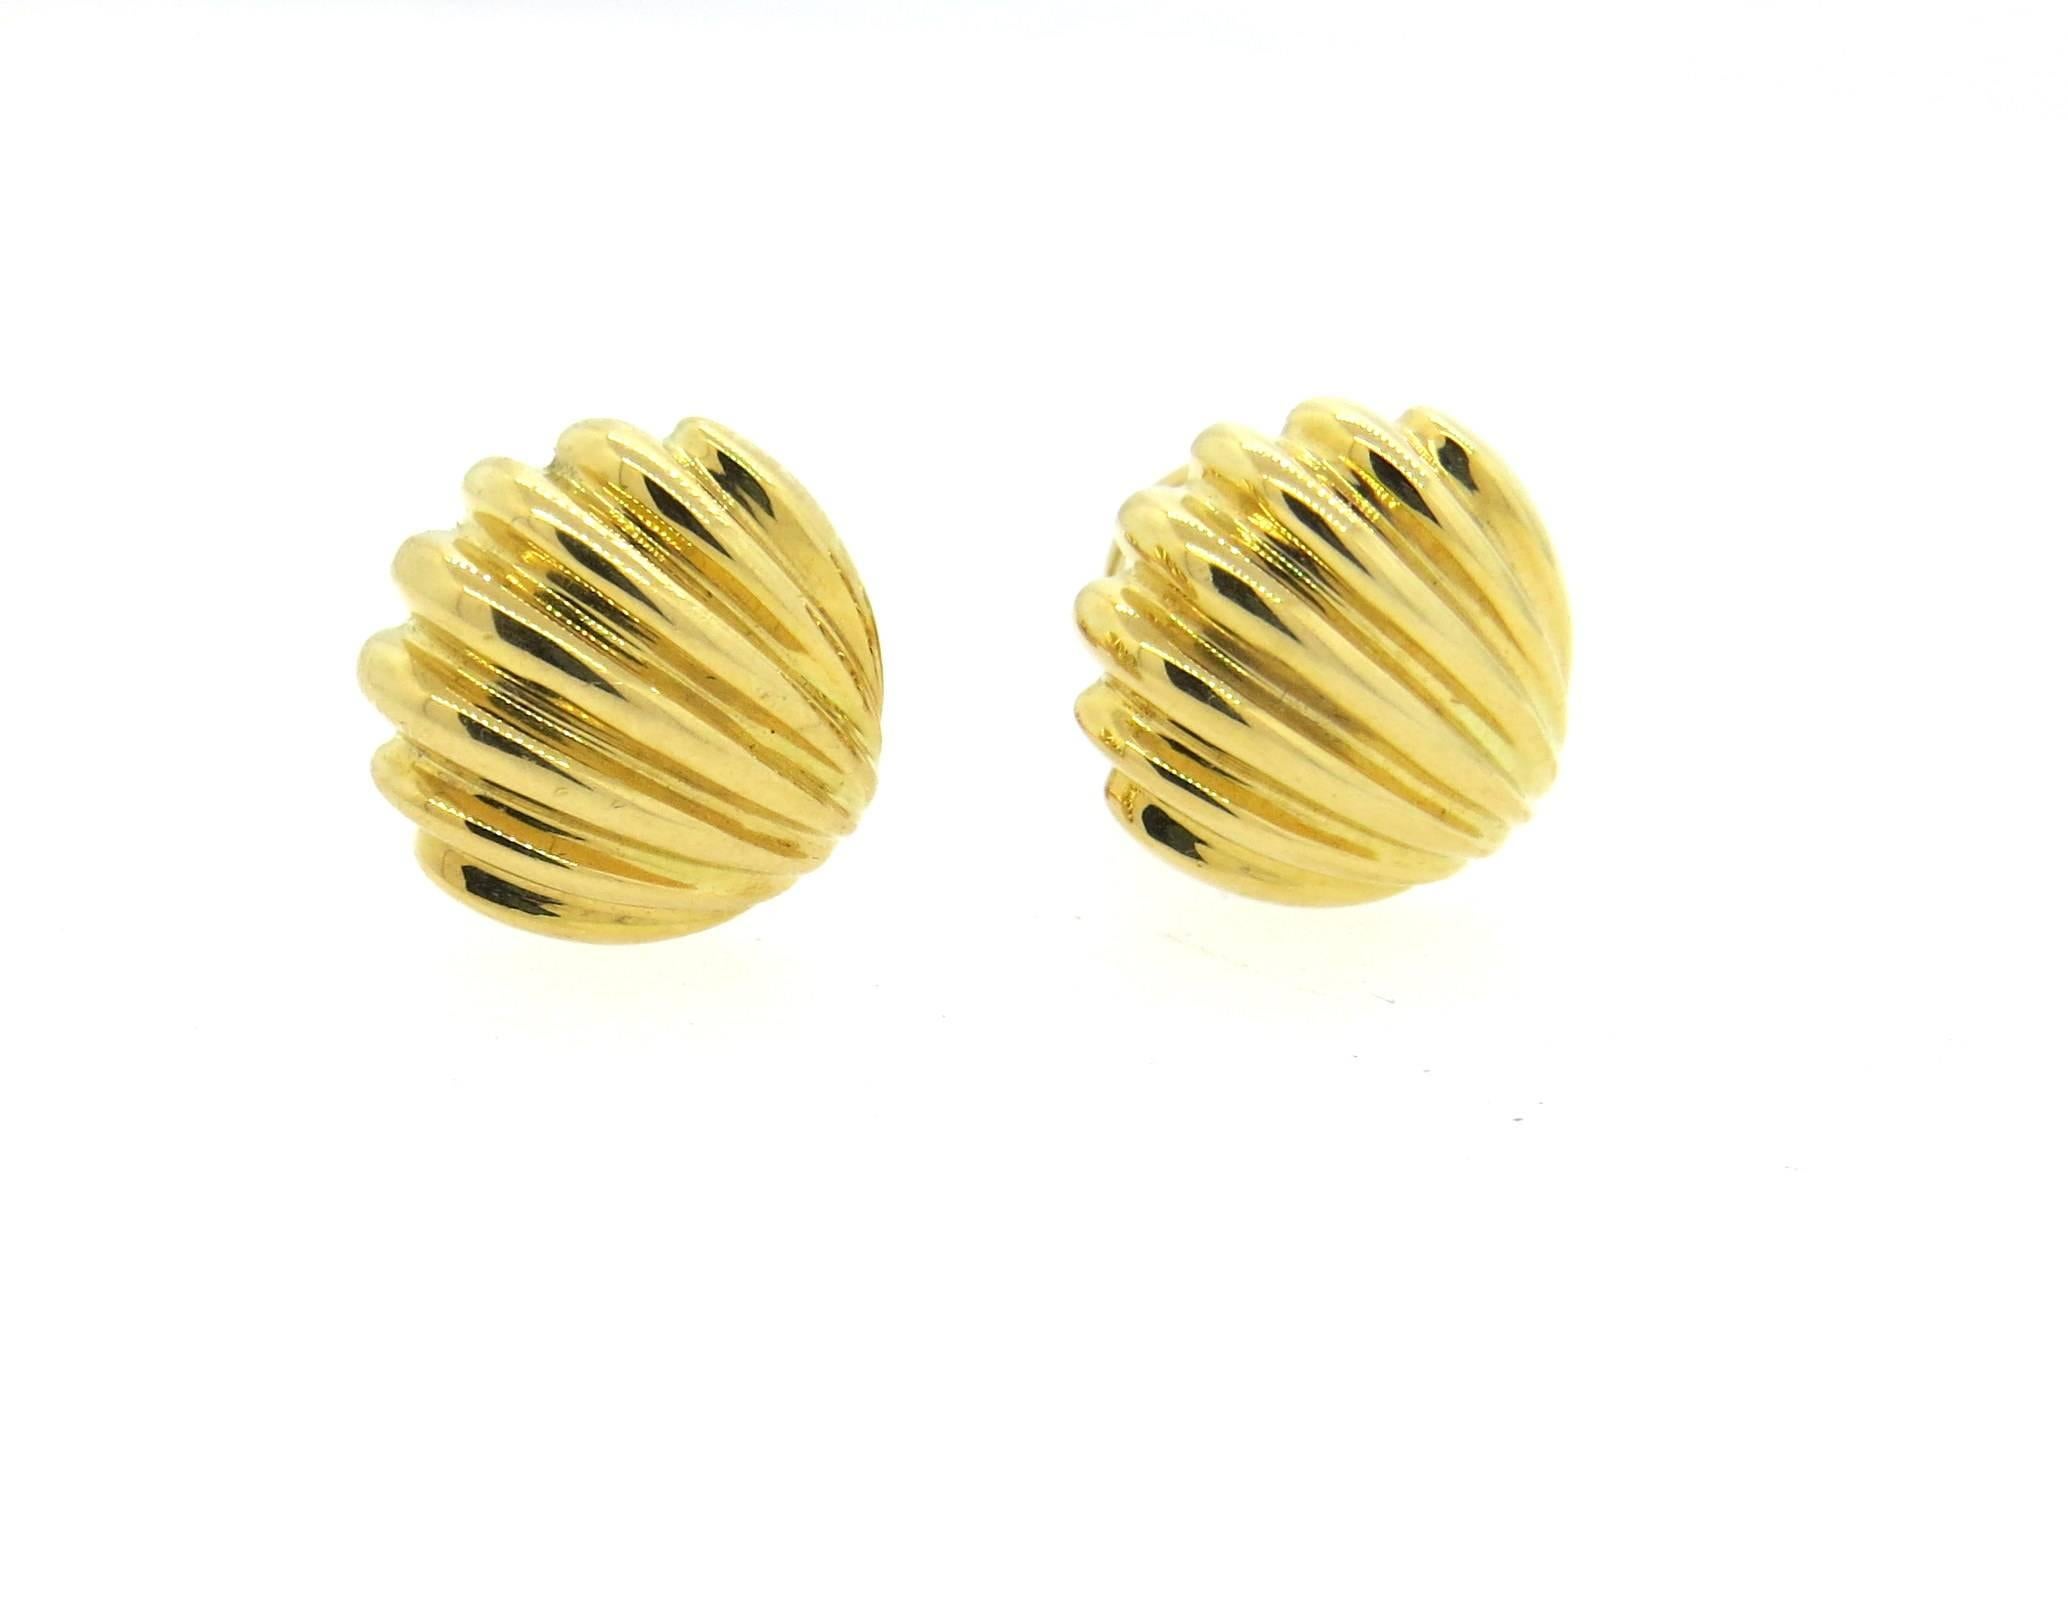 Tiffany & Co. Gold Shell Motif Cufflinks  In Excellent Condition For Sale In Lambertville, NJ